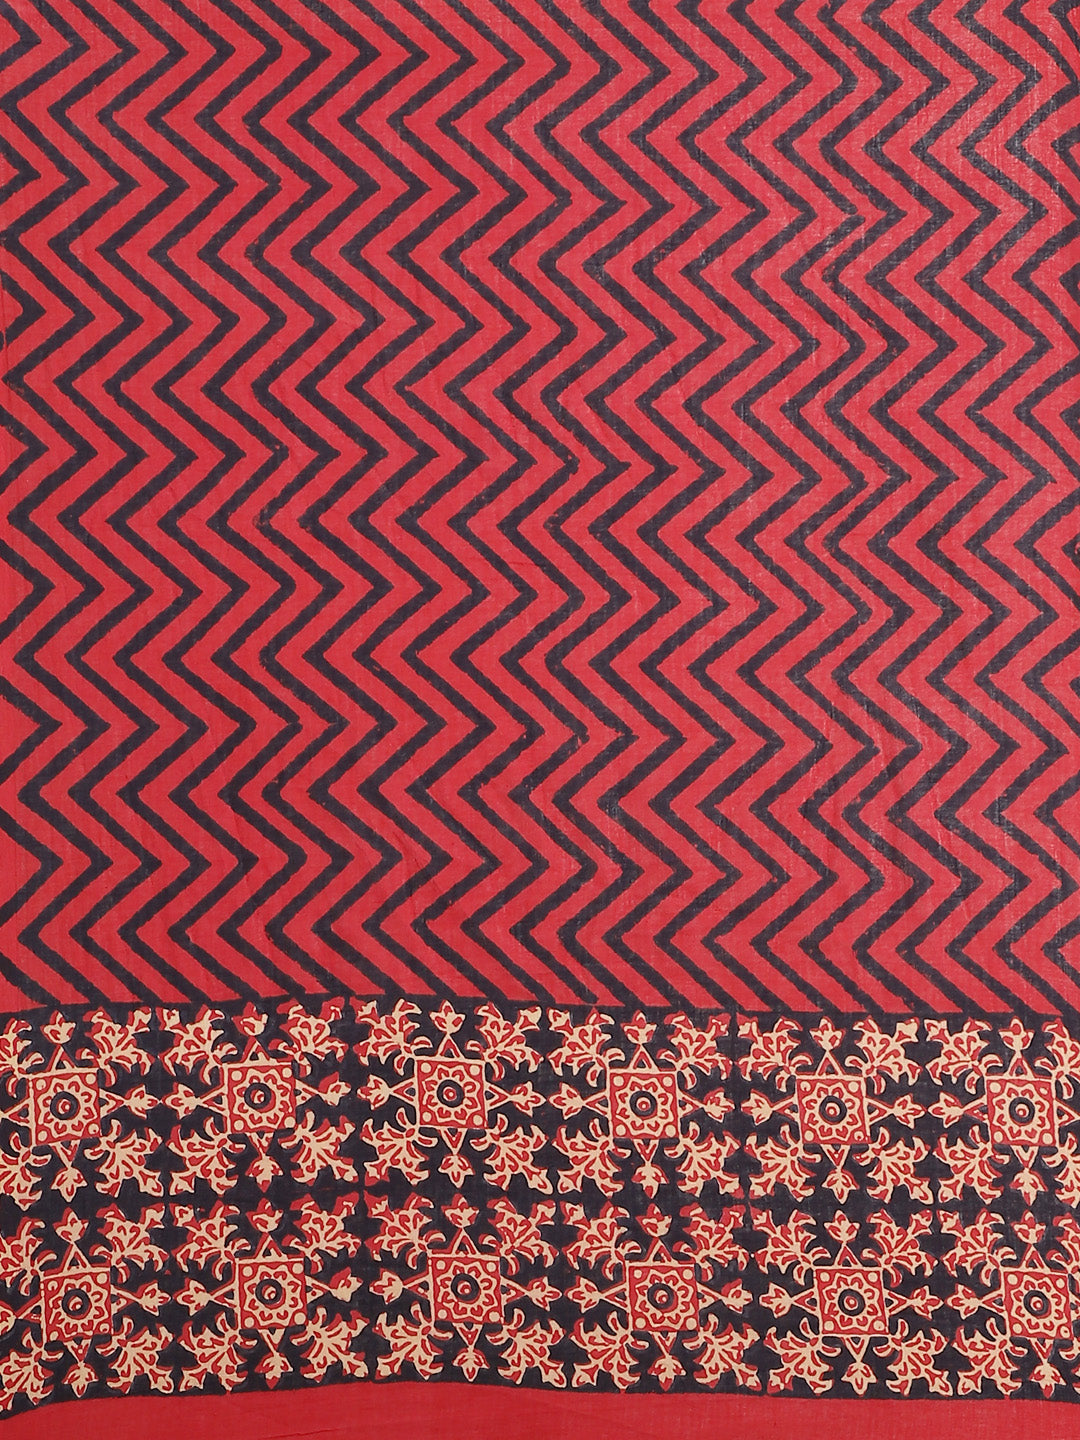 Red and Black, Kalakari India Pure Cotton Handblock Printed Saree and Blouse RCBGSA0020-Saree-Kalakari India-RCBGSA0020-Cotton, Geographical Indication, Hand Block, Hand Crafted, Heritage Prints, Natural Dyes, Red, Sarees, Sustainable Fabrics, Woven, Yellow-[Linen,Ethnic,wear,Fashionista,Handloom,Handicraft,Indigo,blockprint,block,print,Cotton,Chanderi,Blue, latest,classy,party,bollywood,trendy,summer,style,traditional,formal,elegant,unique,style,hand,block,print, dabu,booti,gift,present,glamoro